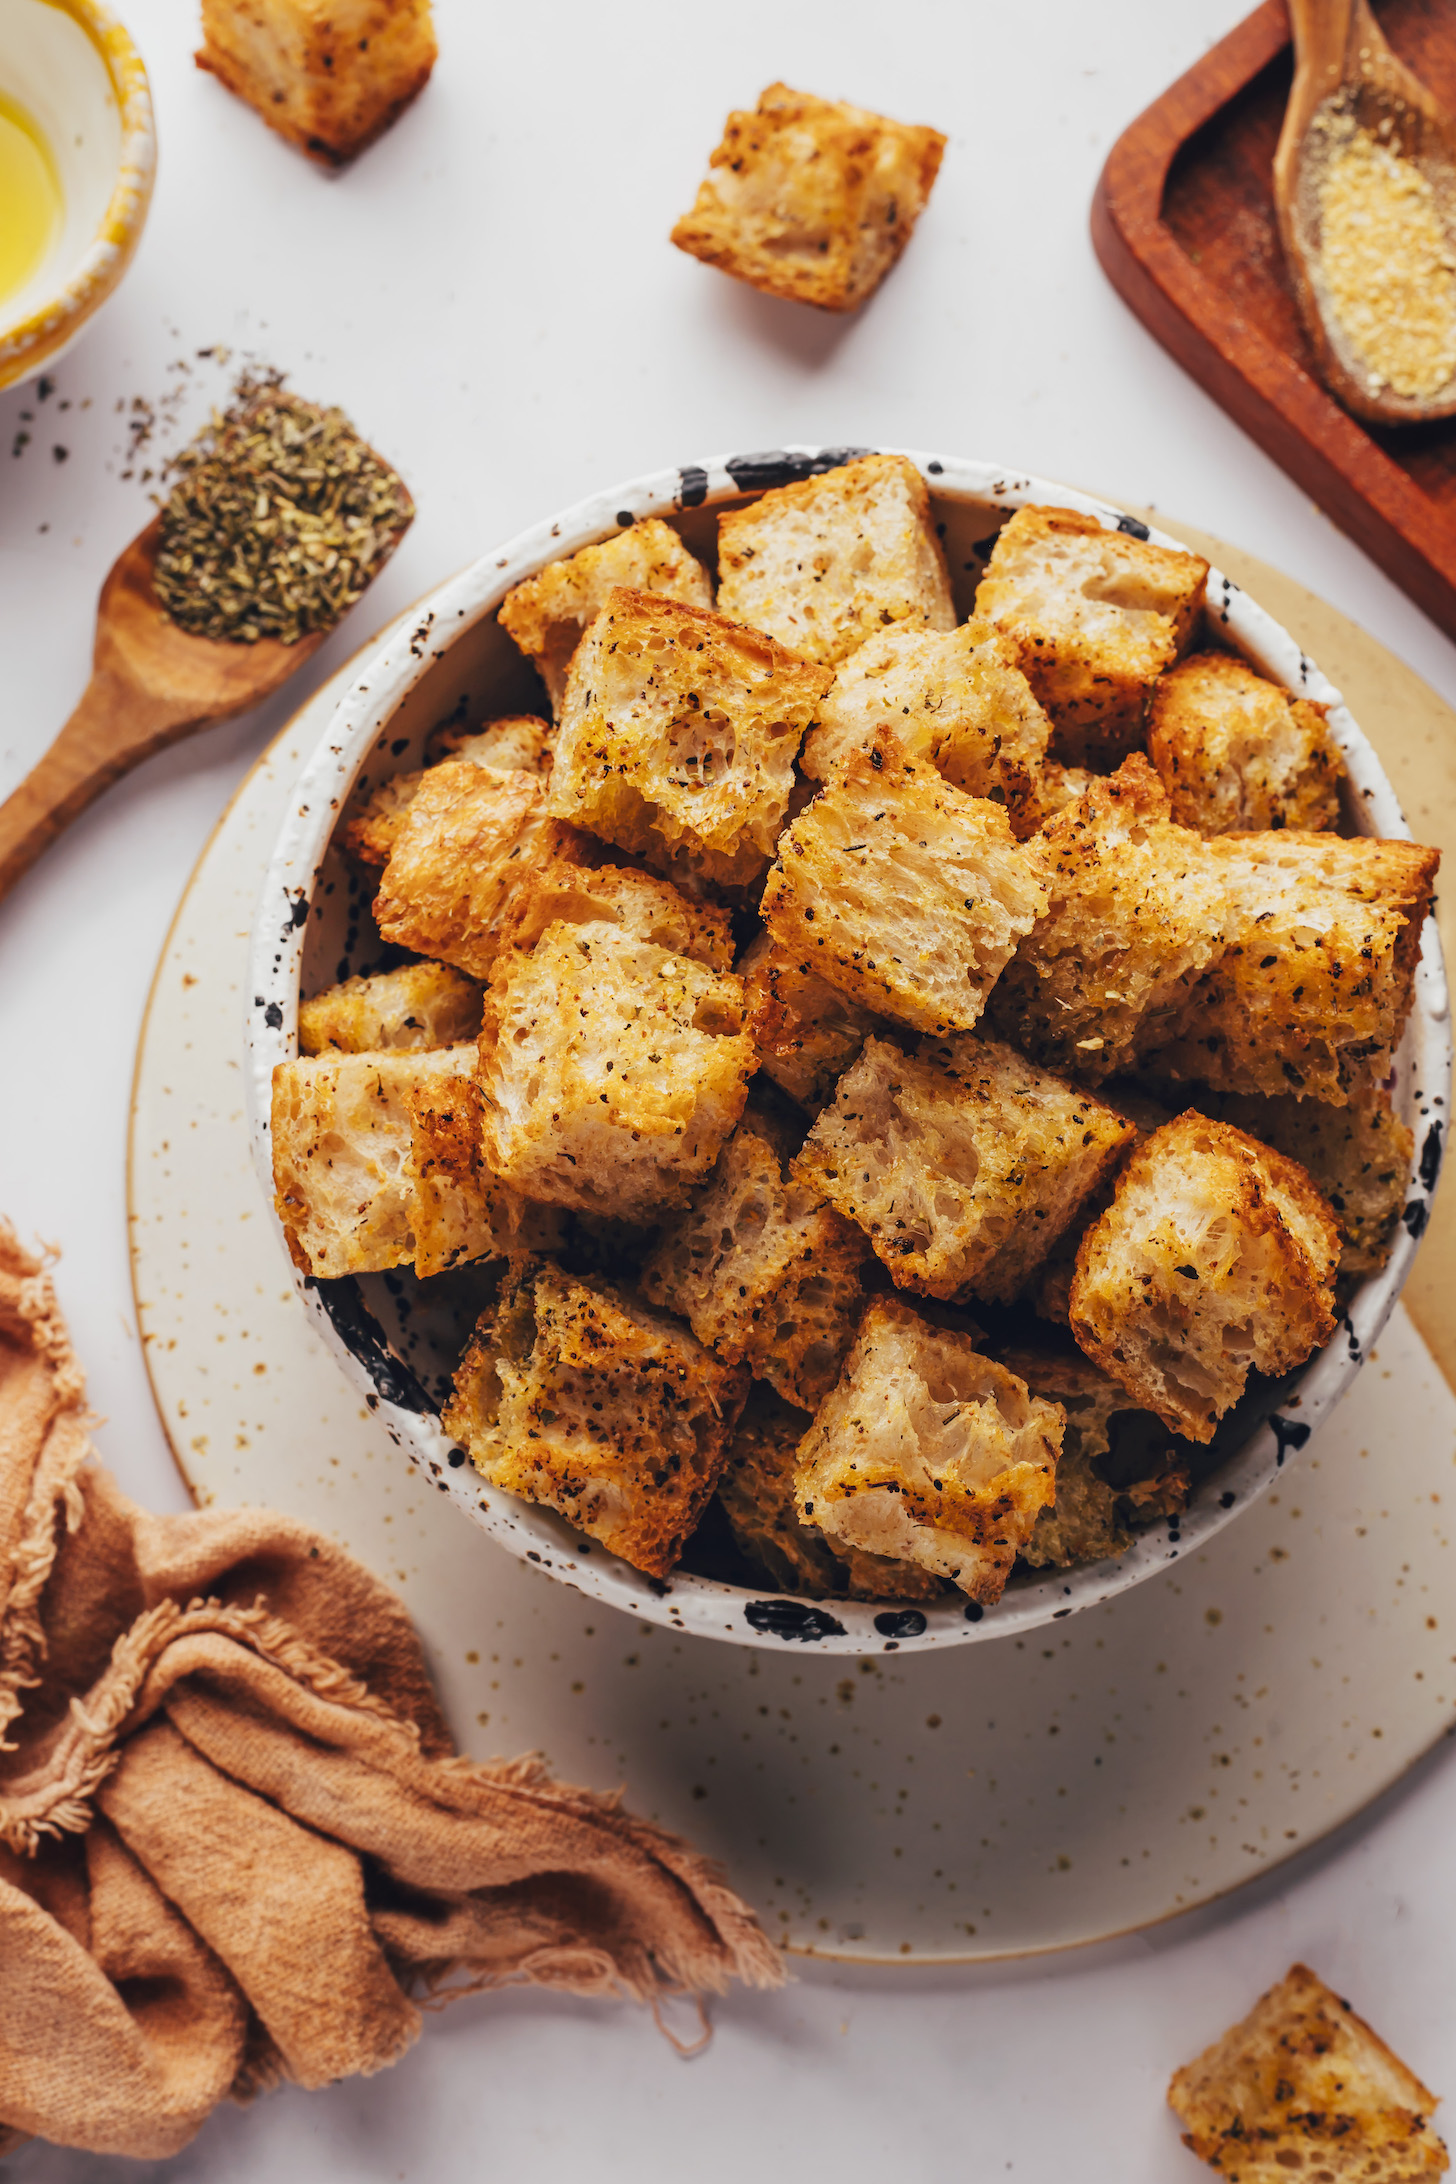 Bowl piled high with sourdough croutons